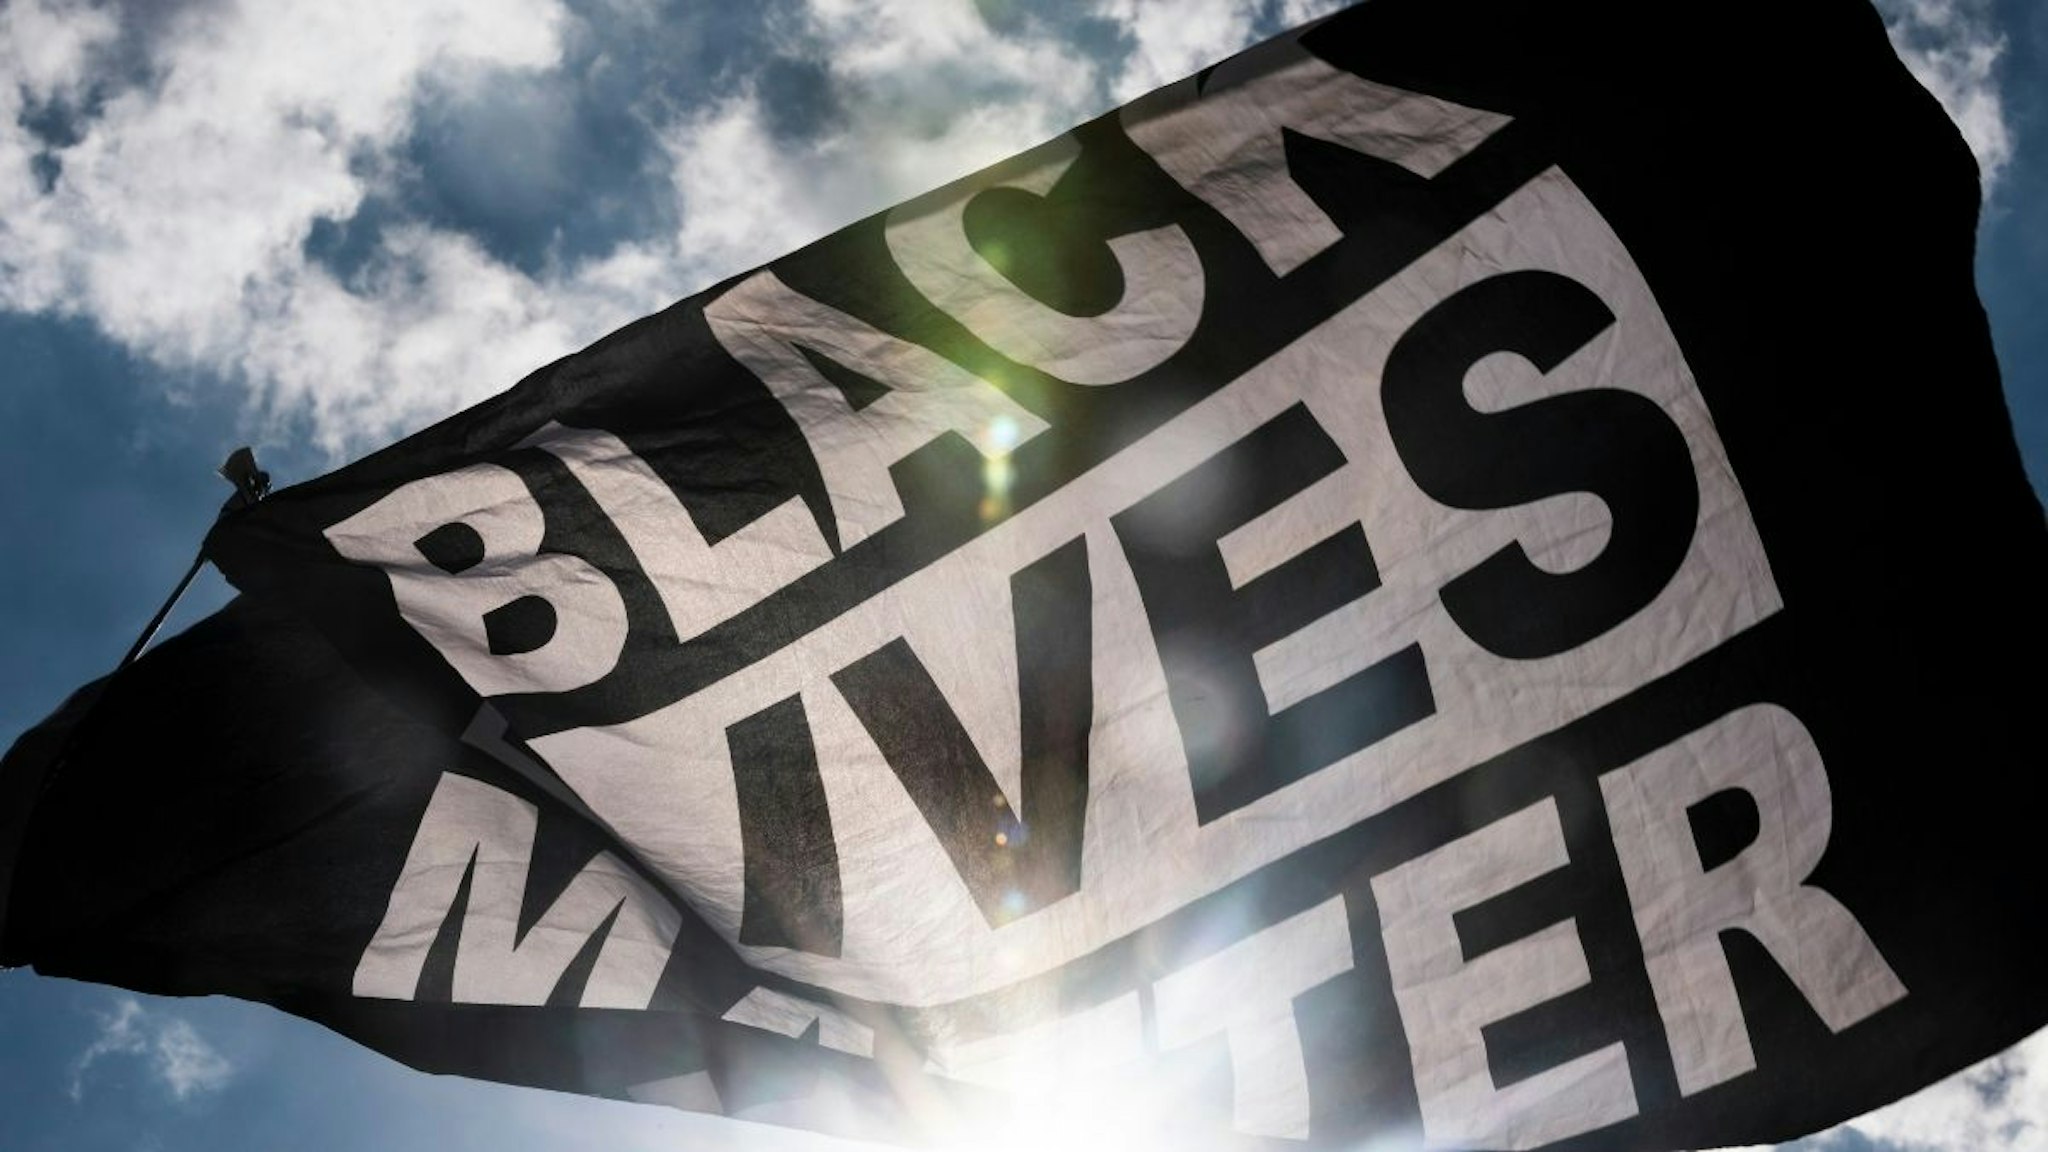 A Black Lives Matter flag waves during a demonstration outside the First Police Precinct Station on June 13, 2020 in Minneapolis, Minnesota.